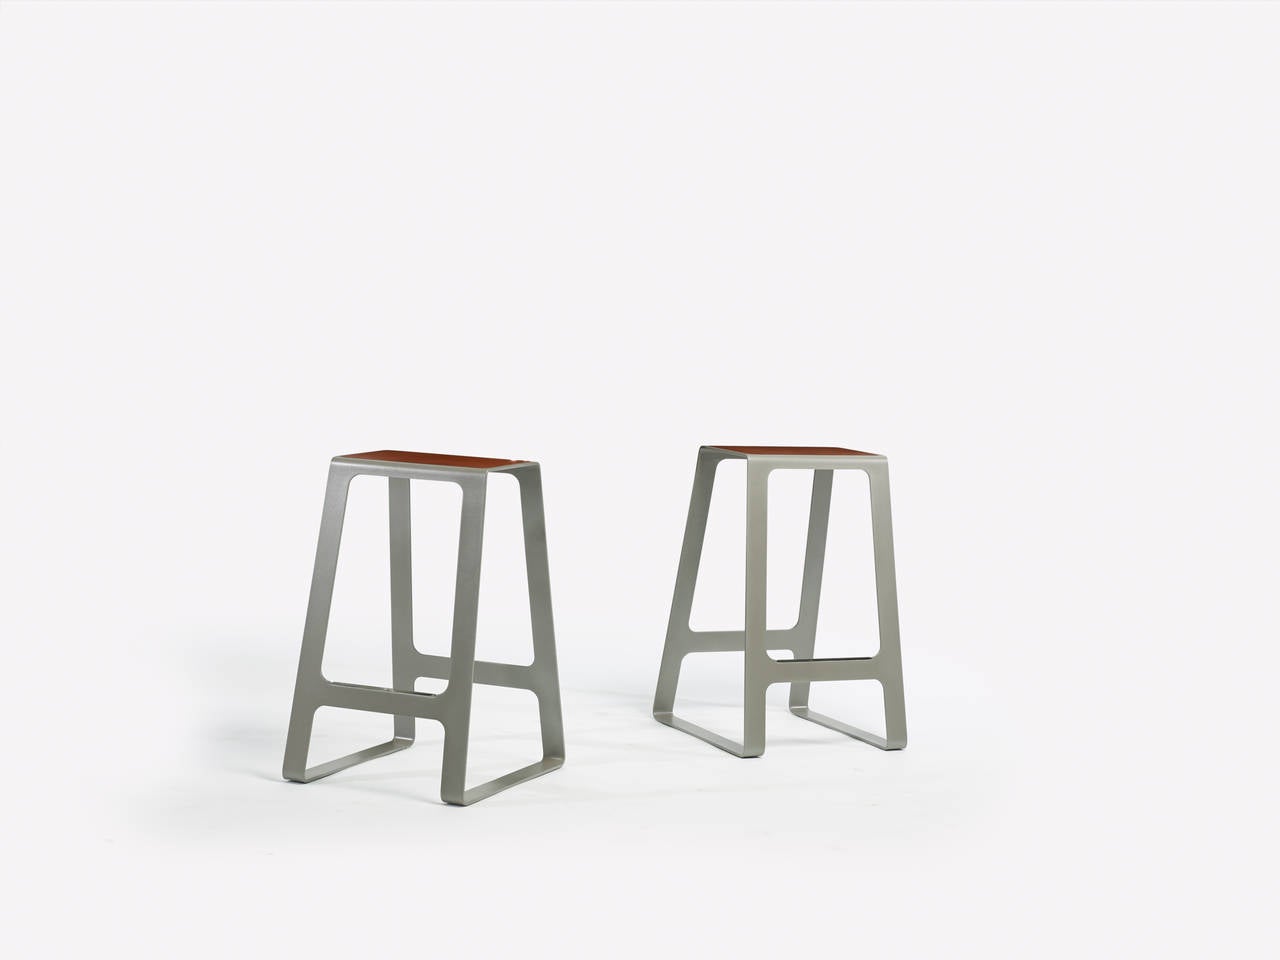 Jonathan Nesci 
A_ Stool, controlled number edition with leather seat and stainless steel foot rest
United States, 2013
Manufactured by Casati Gallery
powder coated steel, leather, stainless steel
26 h x 16 d x 18 w inches